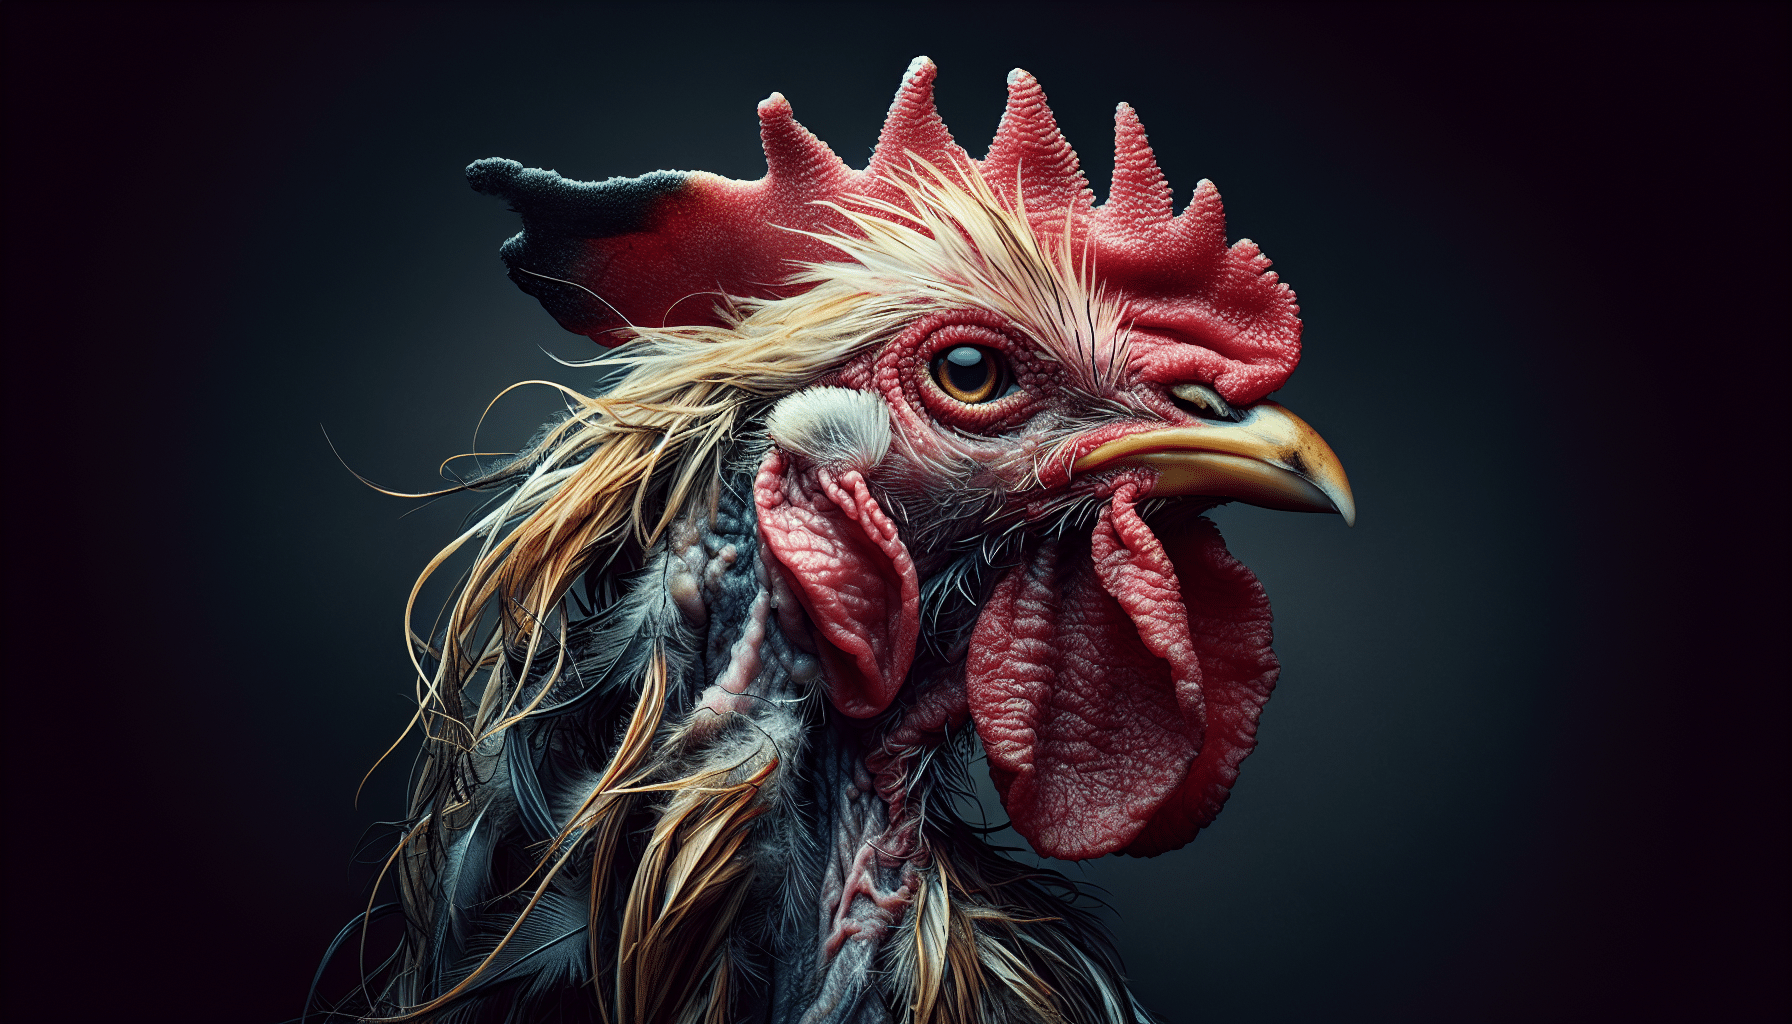 learn the truth about aging roosters and whether old cockerels are actually roosters in this insightful article.